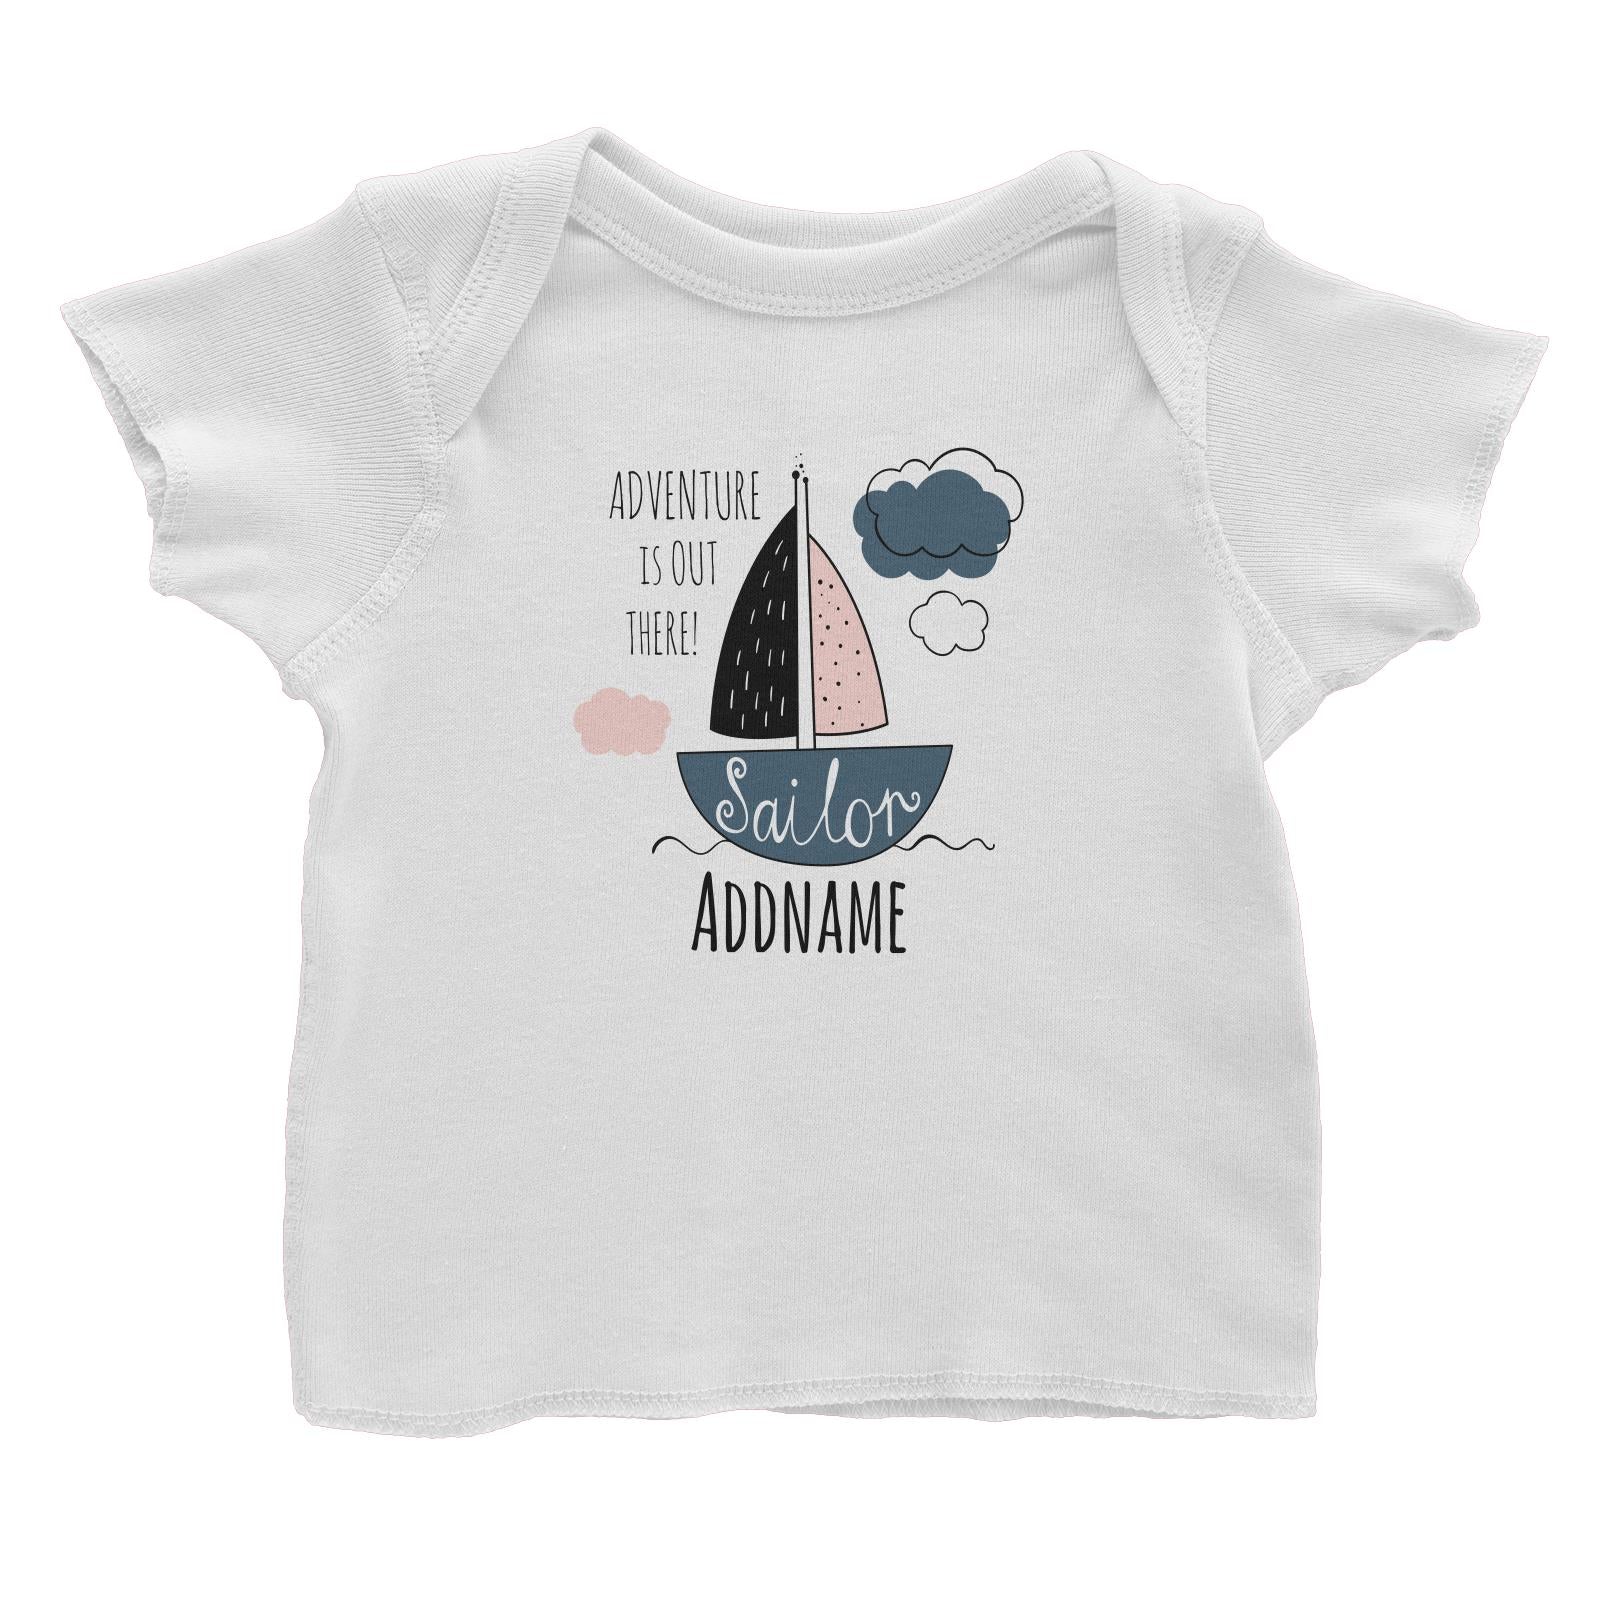 Drawn Ocean Elements Sailor Adventure is Out There Addname Baby T-Shirt